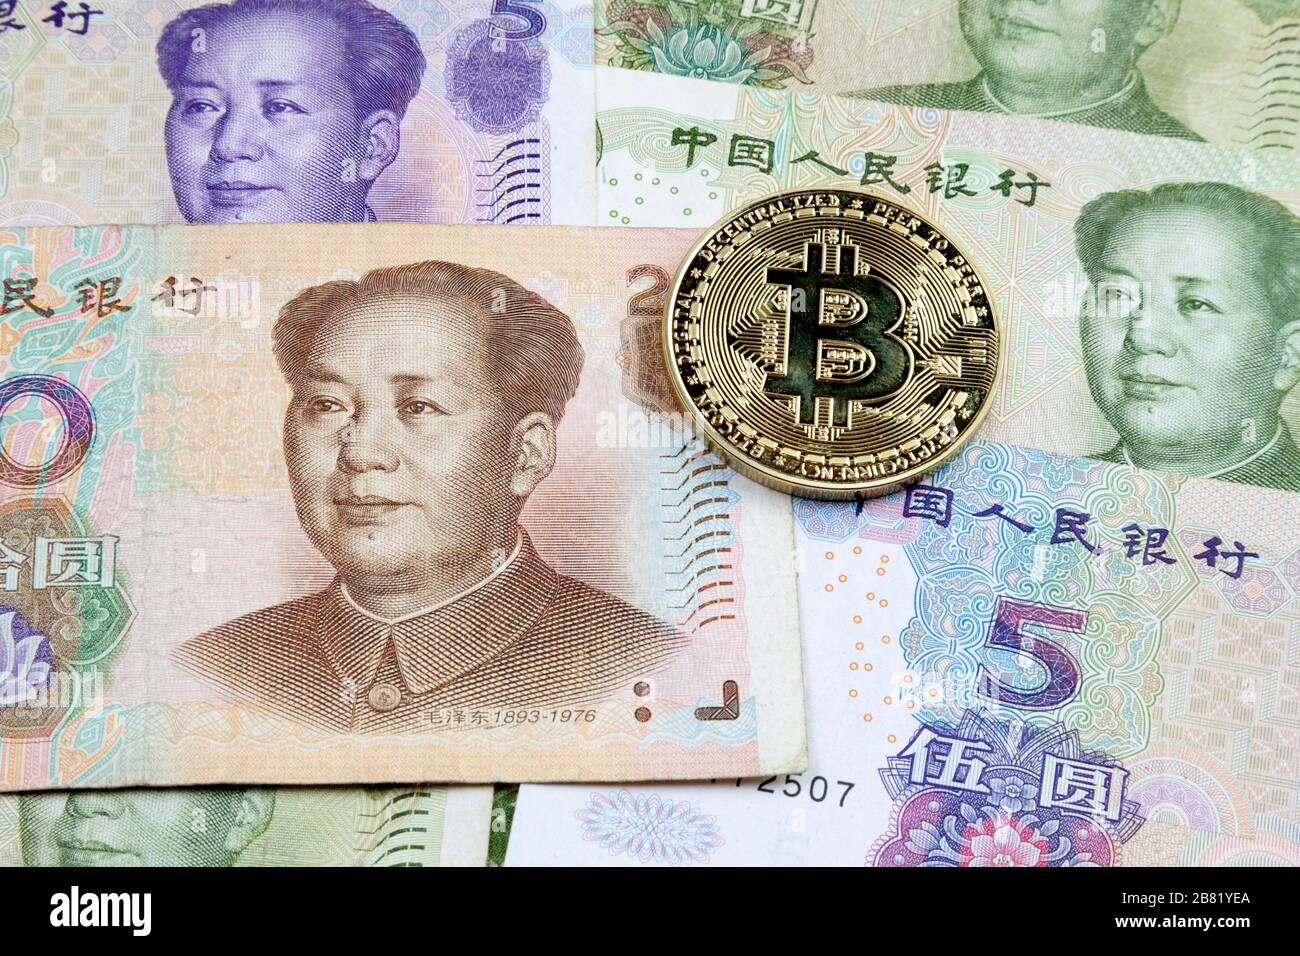 Close-up on a golden Bitcoin coin on top of a stack of Chinese Yuan banknotes. Stock Photo